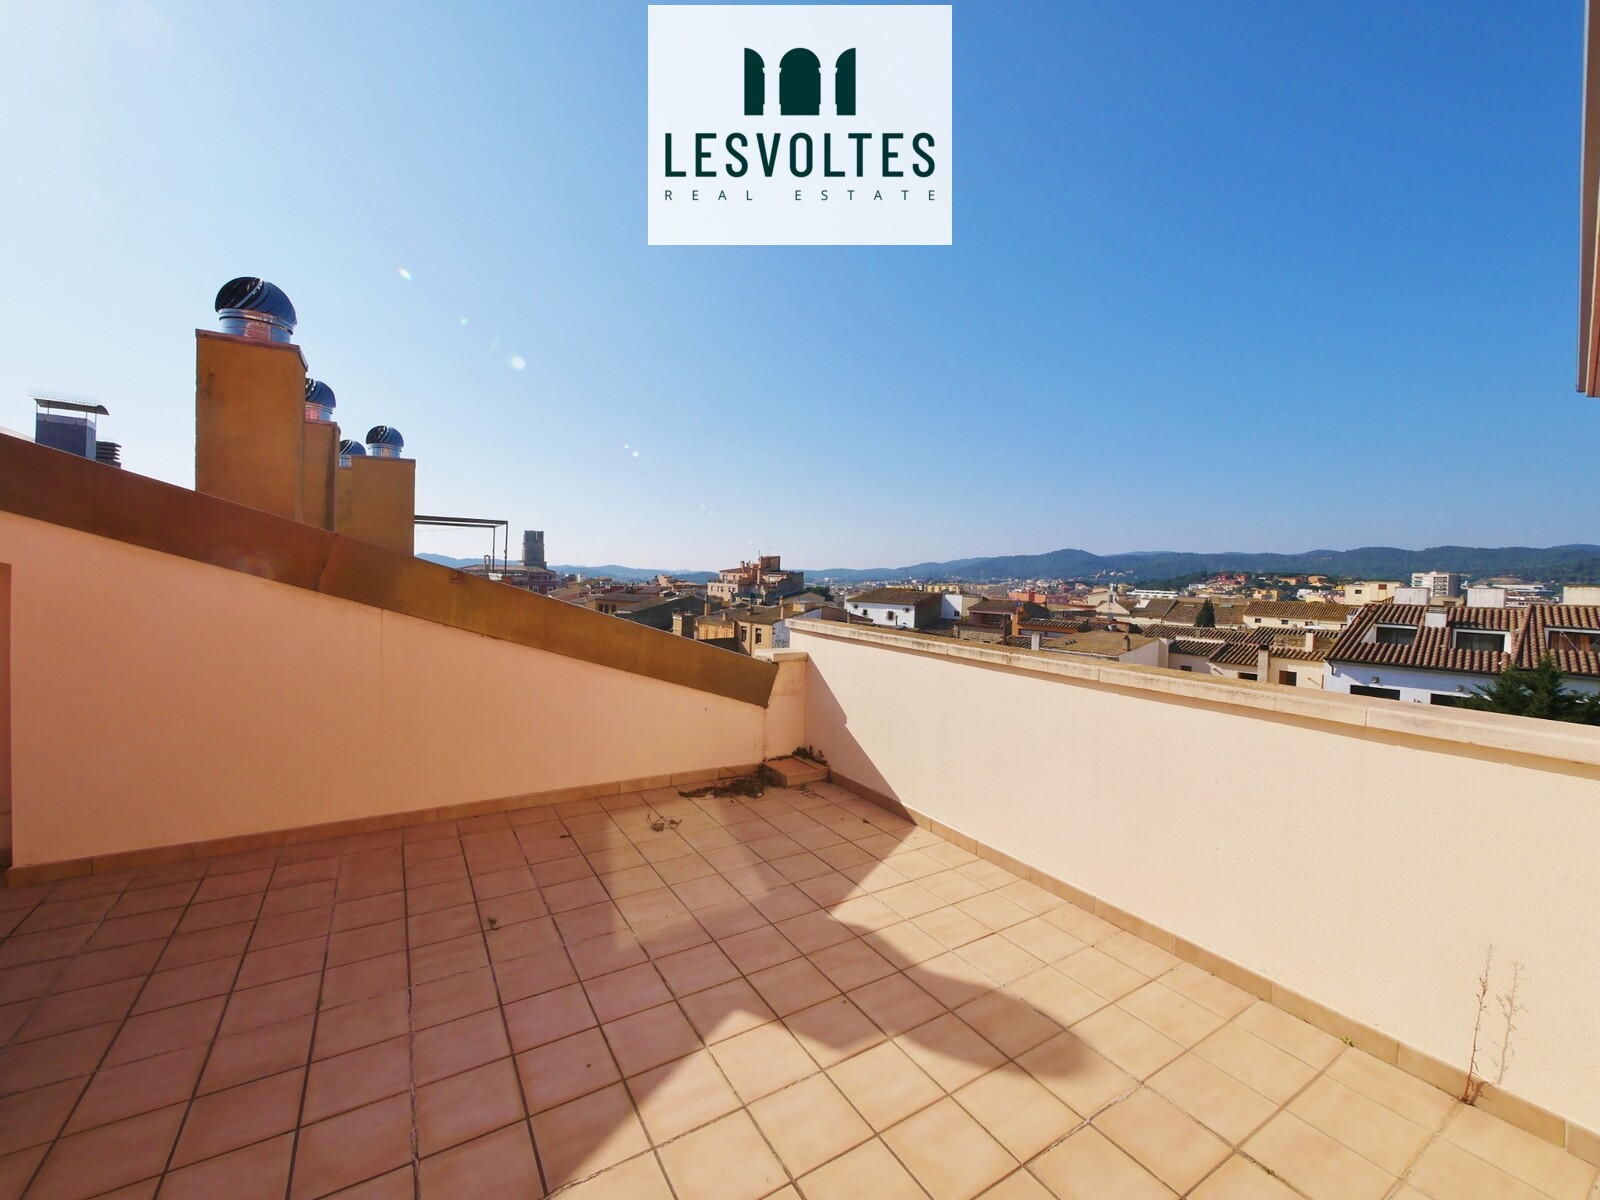 SEMI-NEW DUPLEX PENTHOUSE WITH LARGE TERRACE FOR SALE IN THE CENTER OF PALAFRUGELL. GOOD COMMUNITY WITH ELEVATOR